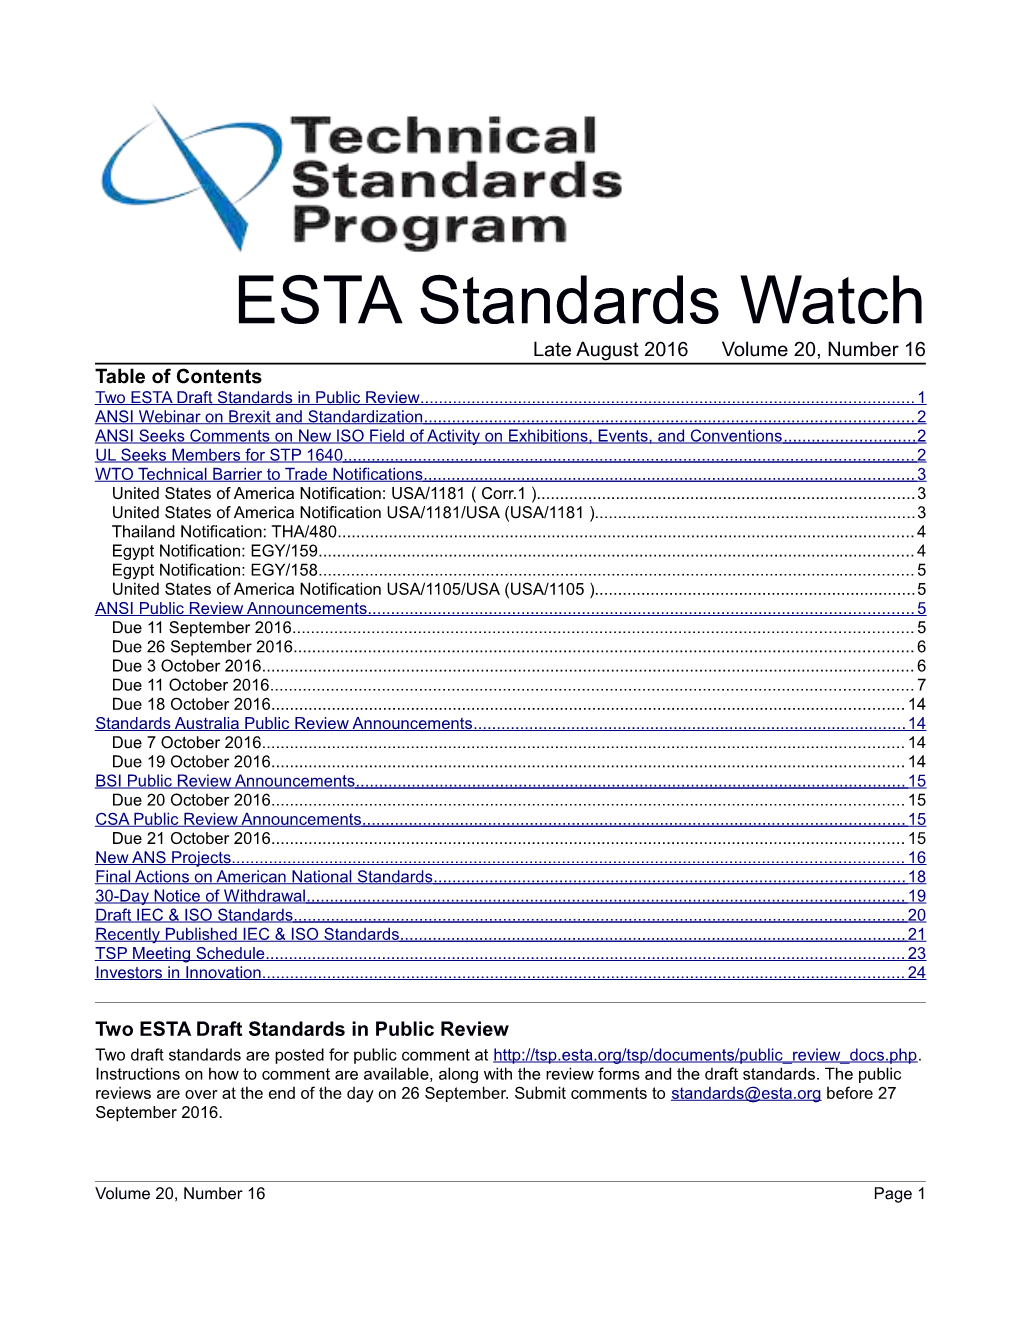 ESTA Standards Watch Late August 2016 Volume 20, Number 16 Table of Contents Two ESTA Draft Standards in Public Review